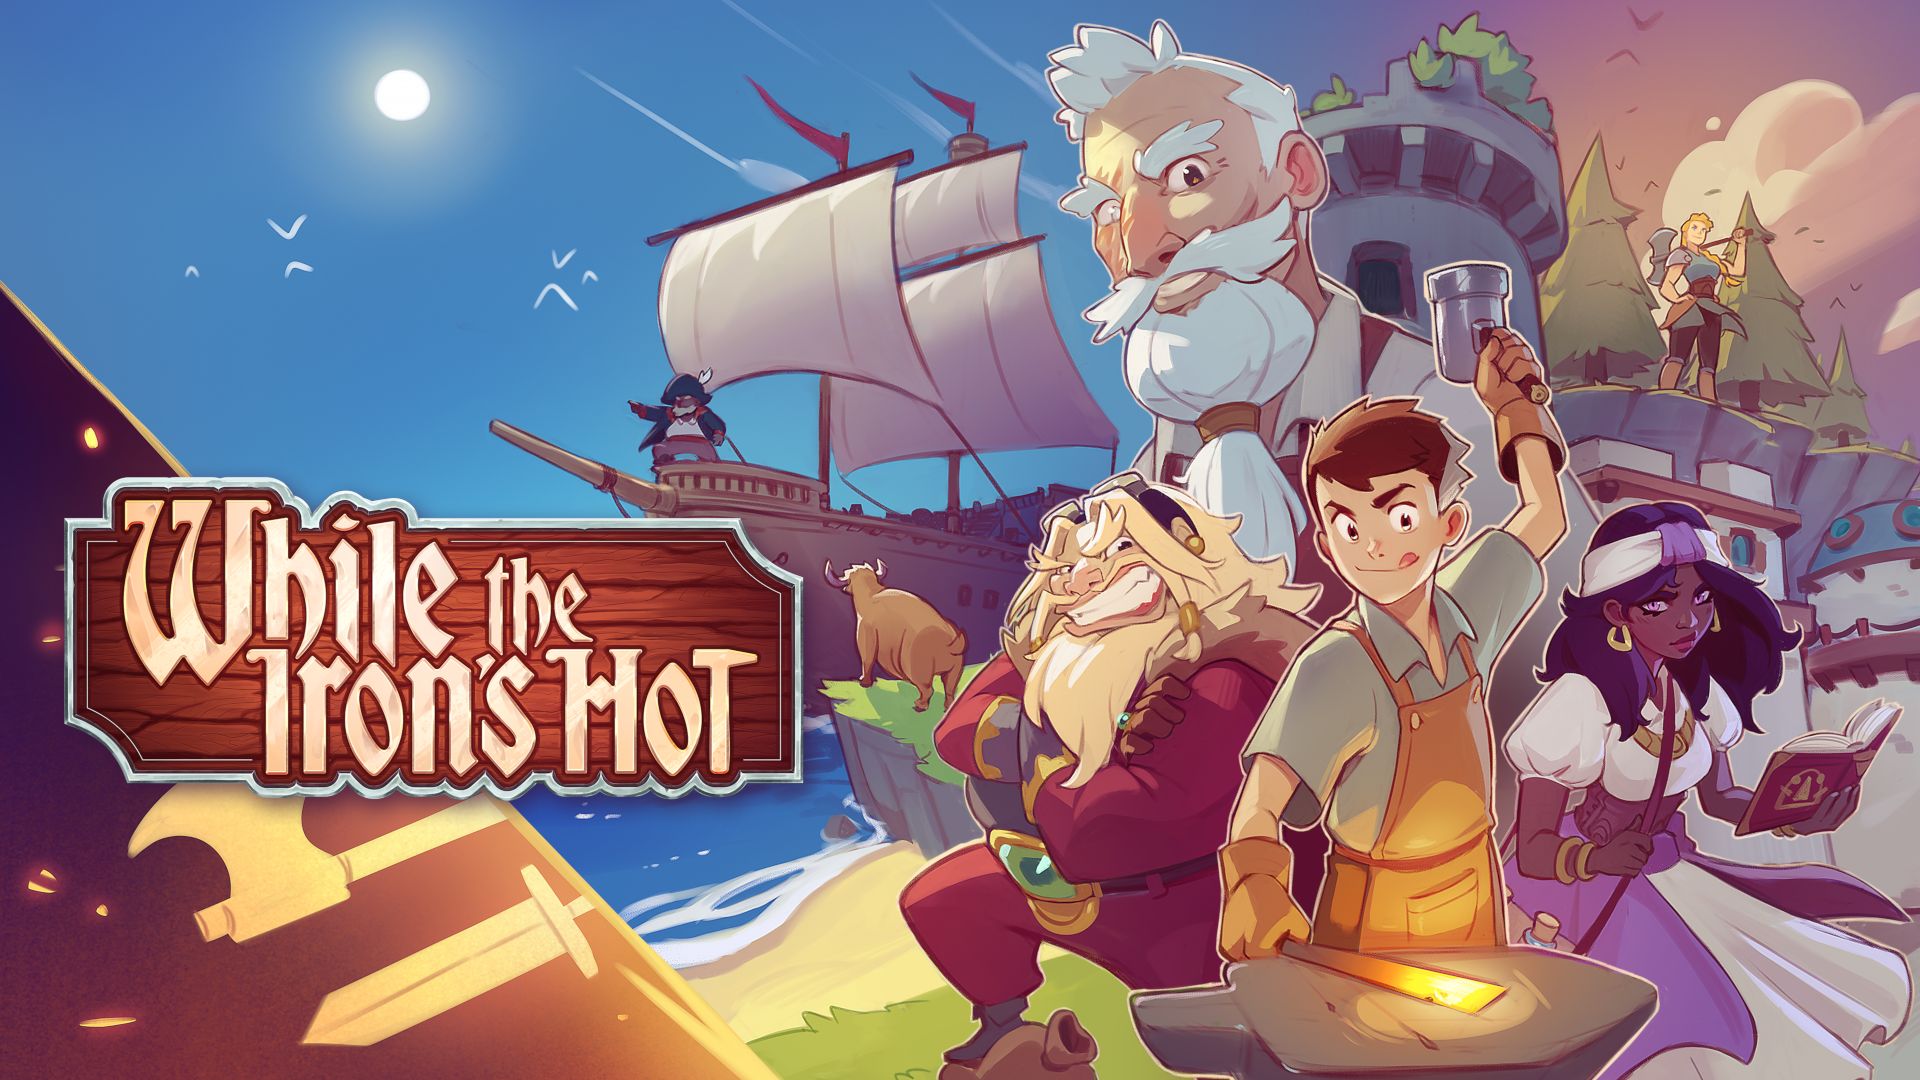 While the Iron's Hot Key Art